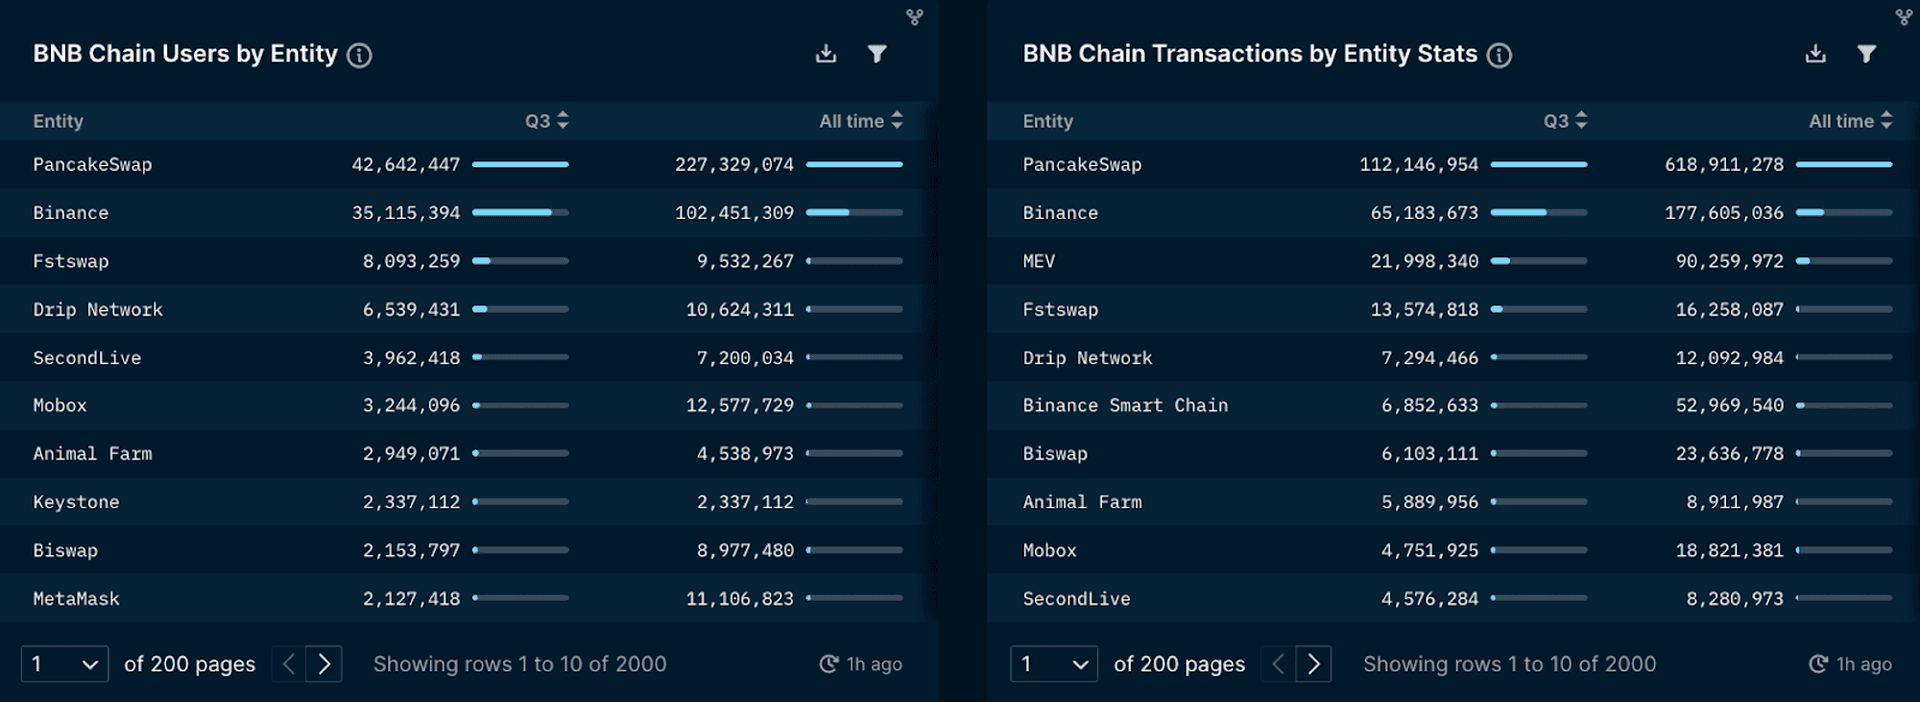 BNB Chain Users and Transactions by Entity (data excludes unlabelled transactions)